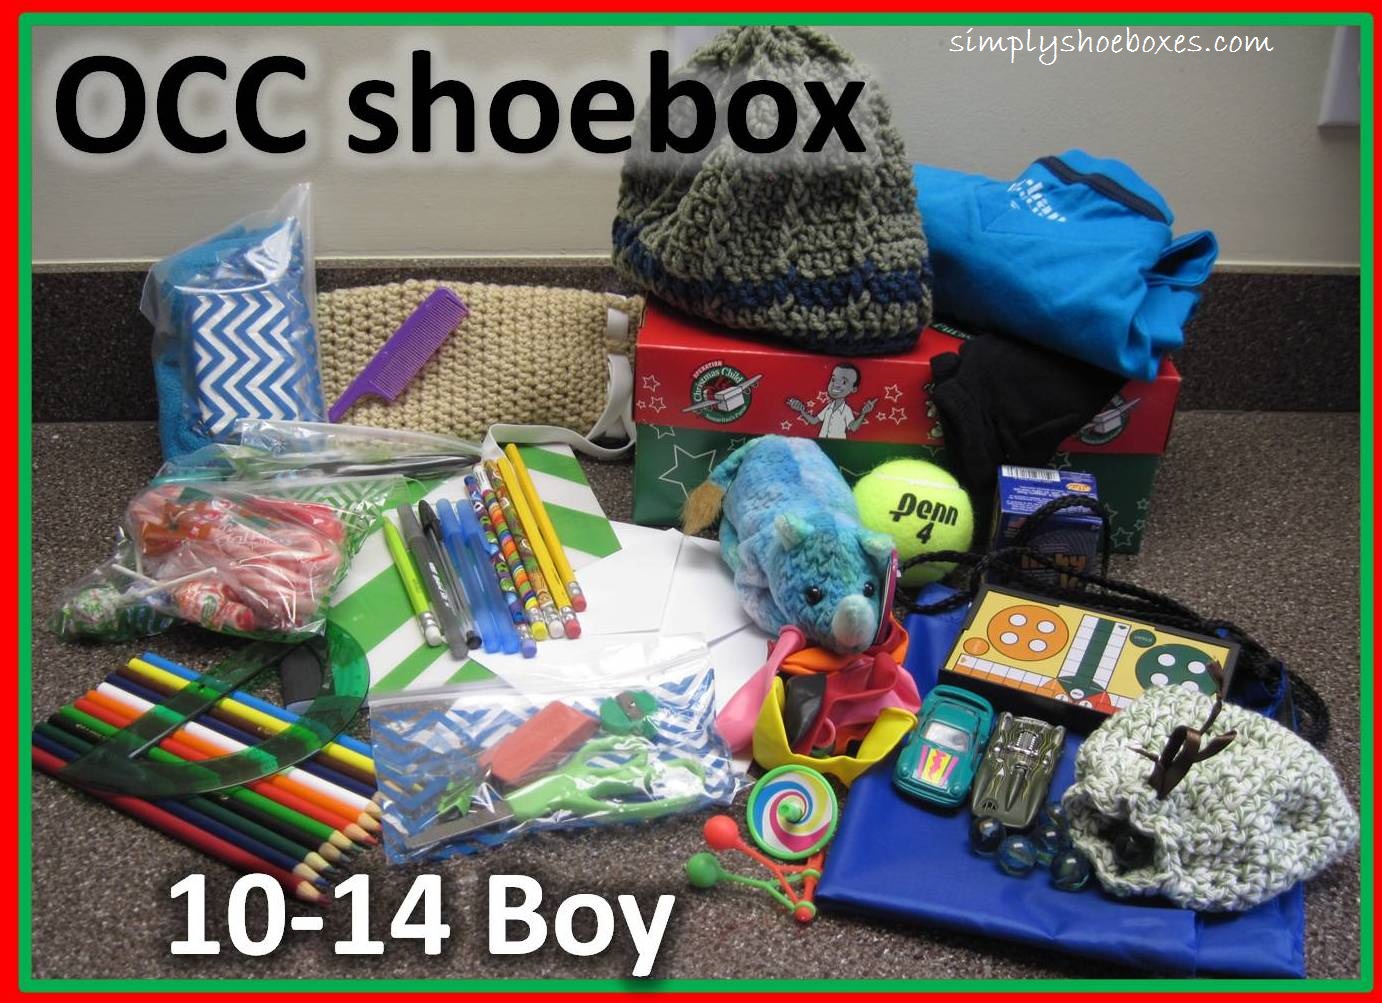 Simply Shoeboxes: Operation Christmas Child Shoebox Packed for 10-14 Year  Old Boy